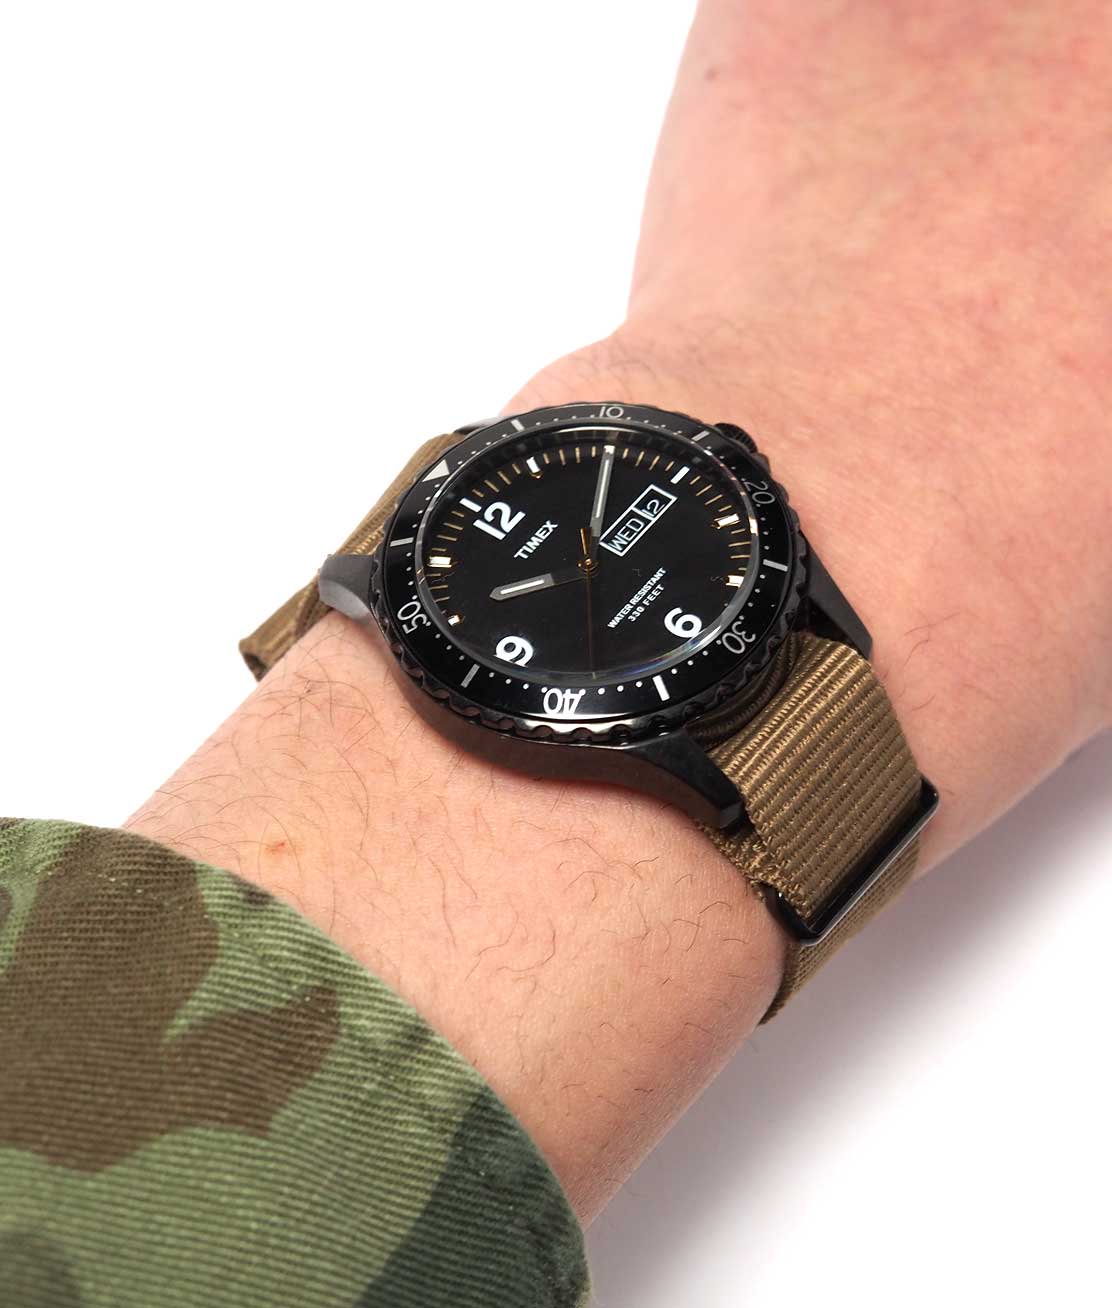 TIMEX for J.CREW】STEALTH WATCH - BLACK ダイバーズウォッチ 時計 